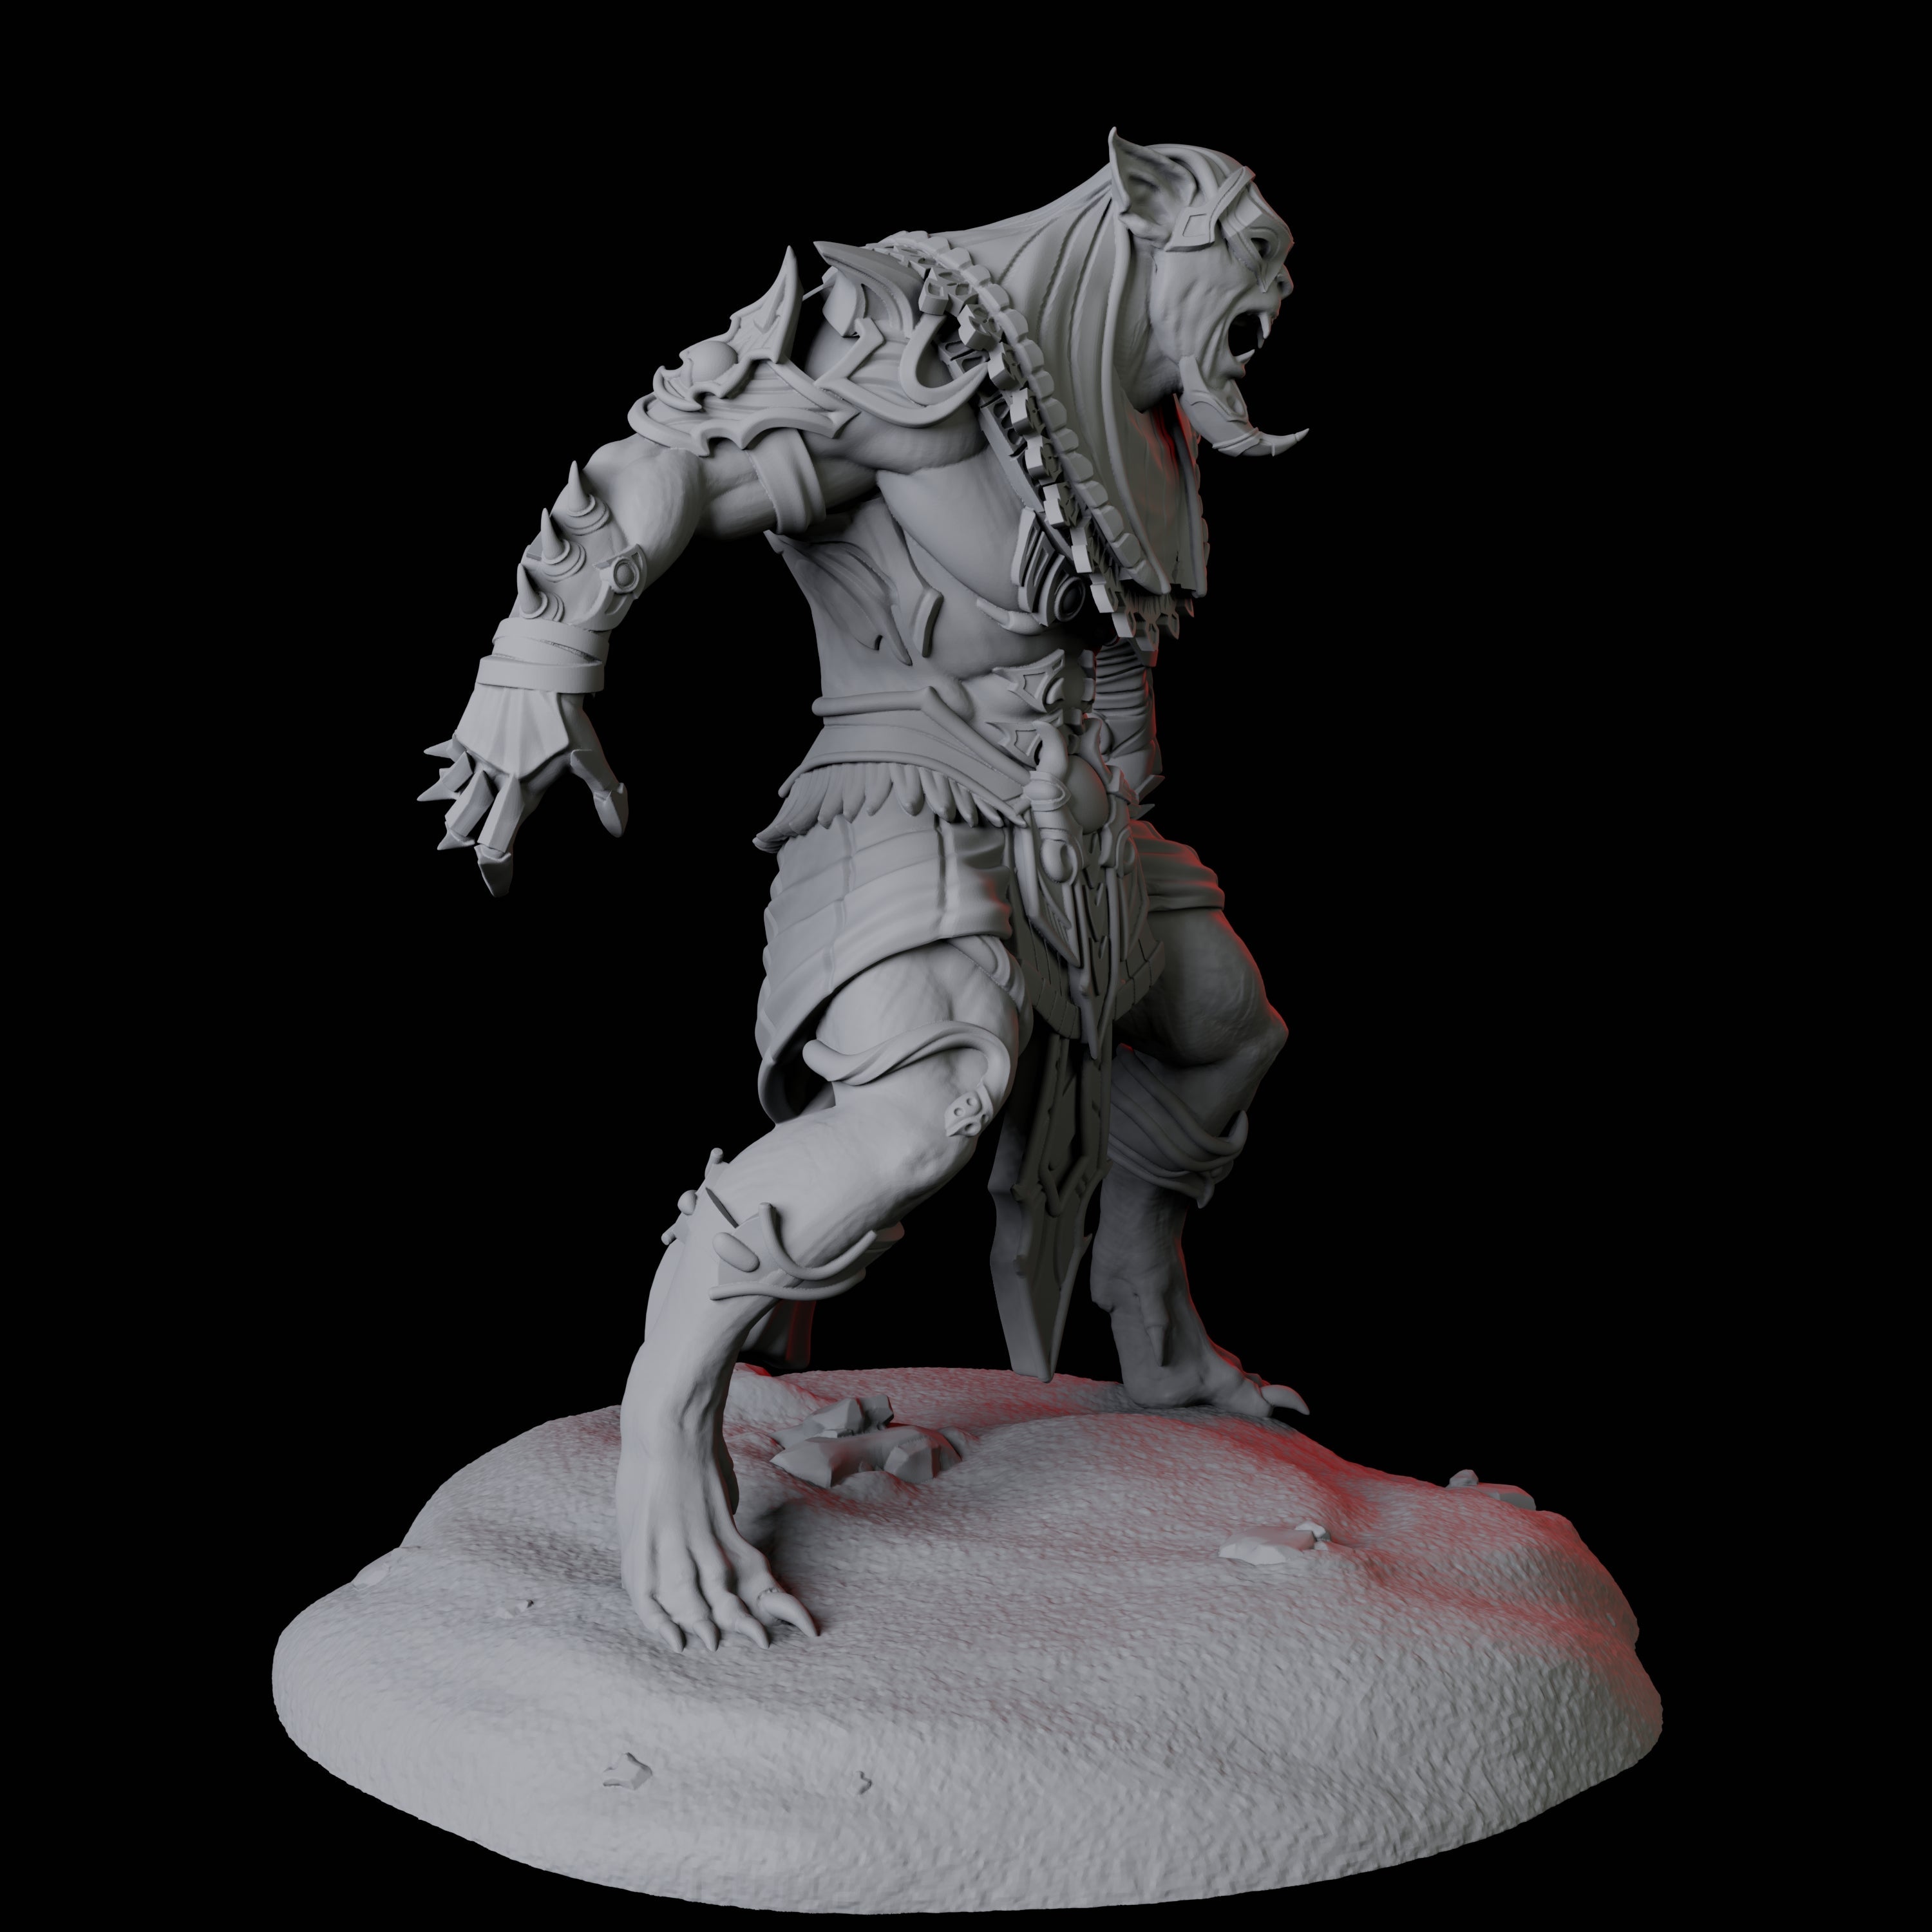 Powerful Tabaxi Warrior D Miniature for Dungeons and Dragons, Pathfinder or other TTRPGs